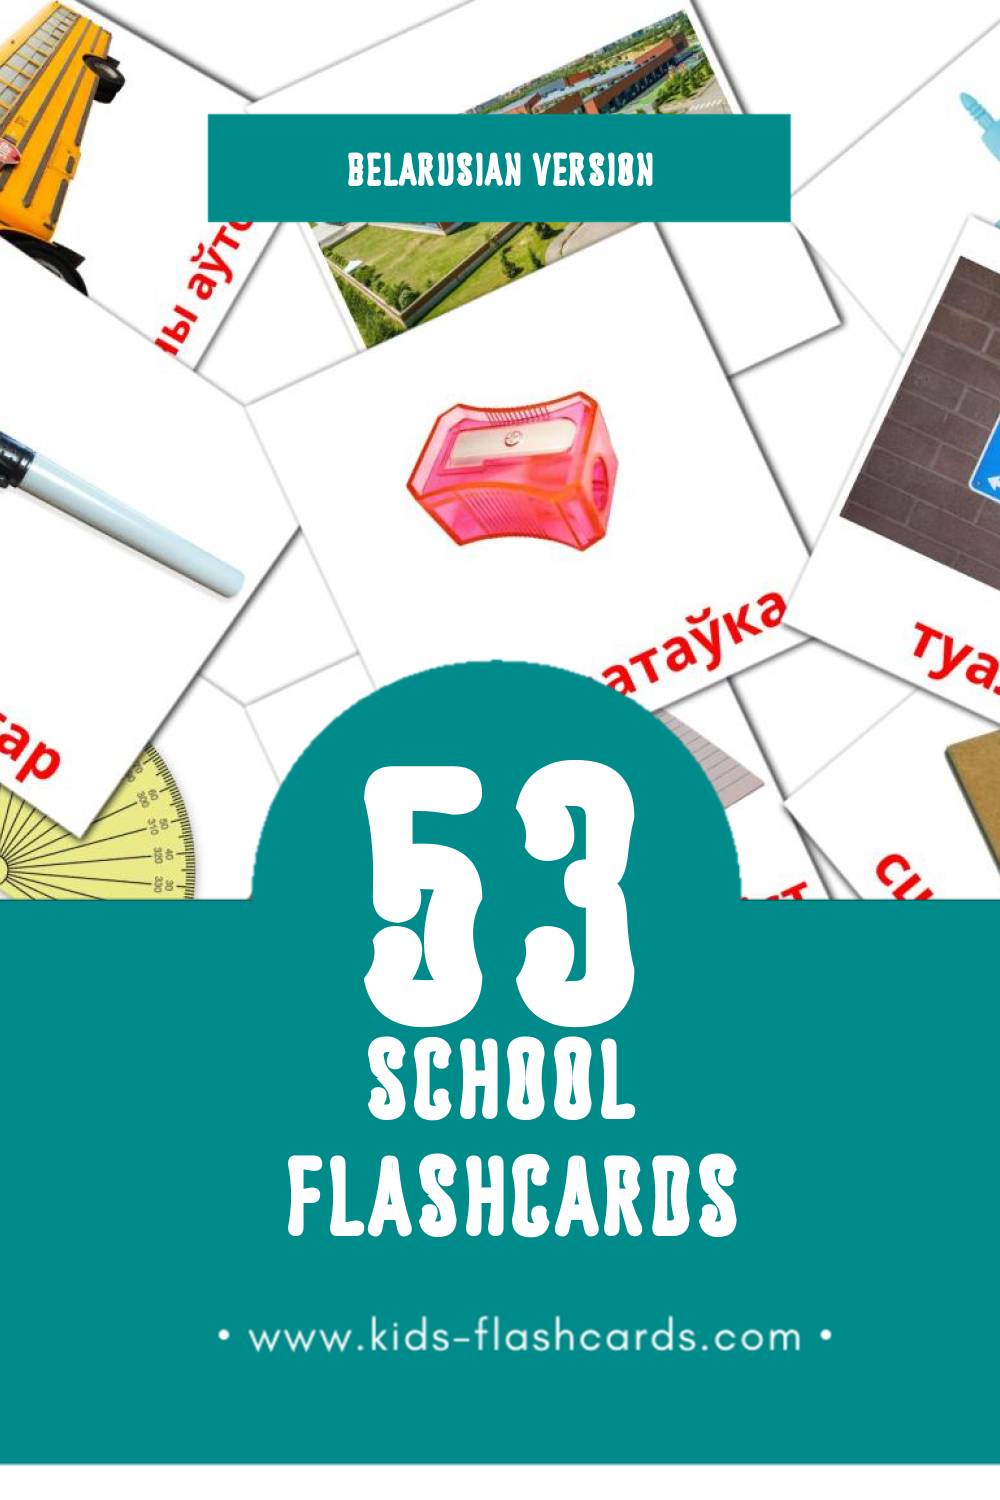 Visual Школа Flashcards for Toddlers (53 cards in Belarusian)